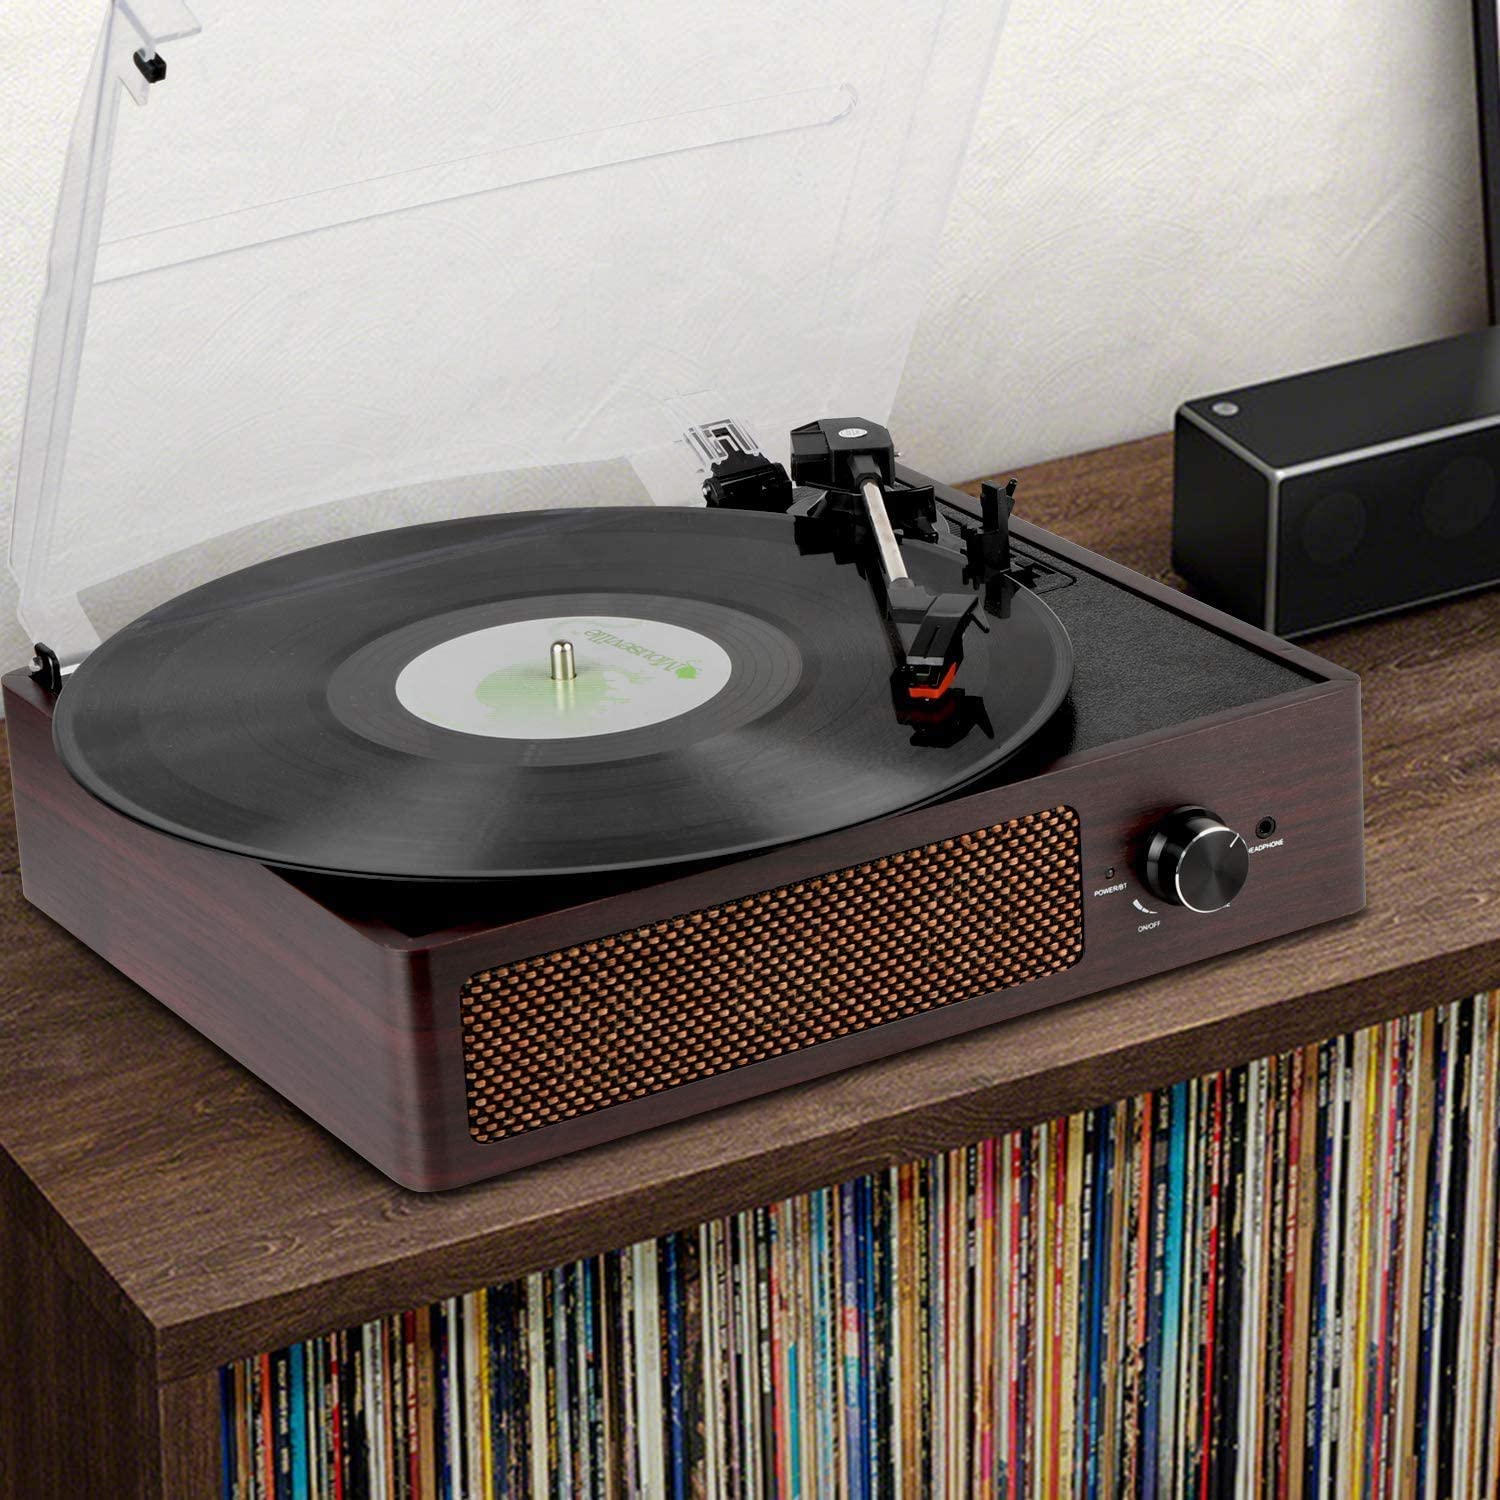  Vinyl Record Player Wireless Turntable with Built-in Speakers  and USB Belt-Driven Vintage Phonograph Record Player 3 Speed for  Entertainment and Home Decoration : Electronics